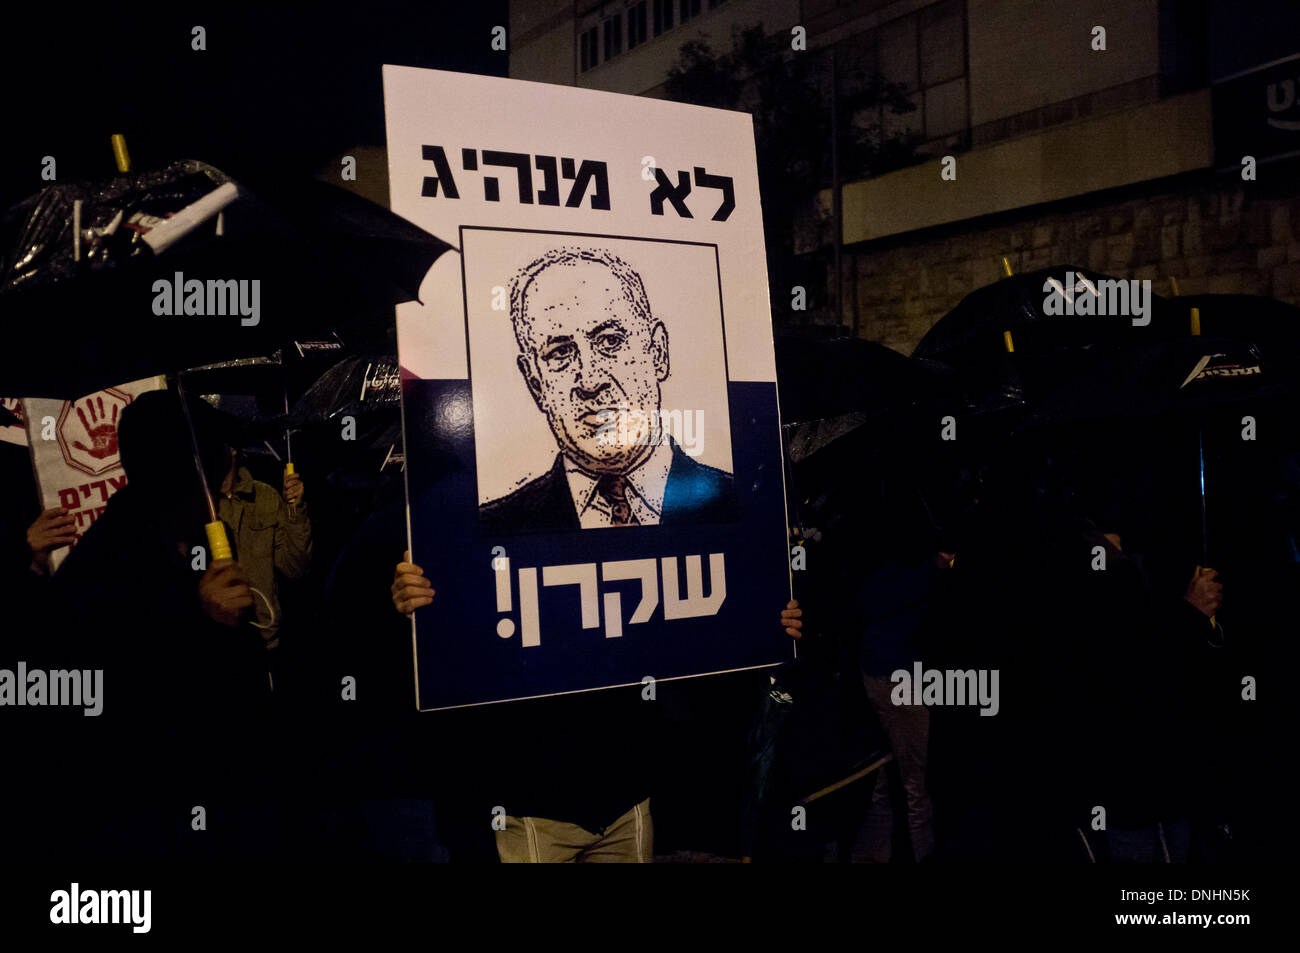 Jerusalem, Israel. 30th Dec, 2013. Protesters carry a placard depicting PM Netanyahu which reads; 'Not a leader. A liar.' as they protest government intention to release convicted terrorists in the framework of peace negotiations with the Palestinians. Jerusalem, Israel. 30-Dec-2013.  Almagor Terror Victims Association leads a 'Black Umbrellas March' protesting planned Palestinian prisoners release later tonight, pointing to Chamberlain's appeasement policies and misjudgments that nearly caused Britain's WWII defeat. Credit:  Nir Alon/Alamy Live News Stock Photo